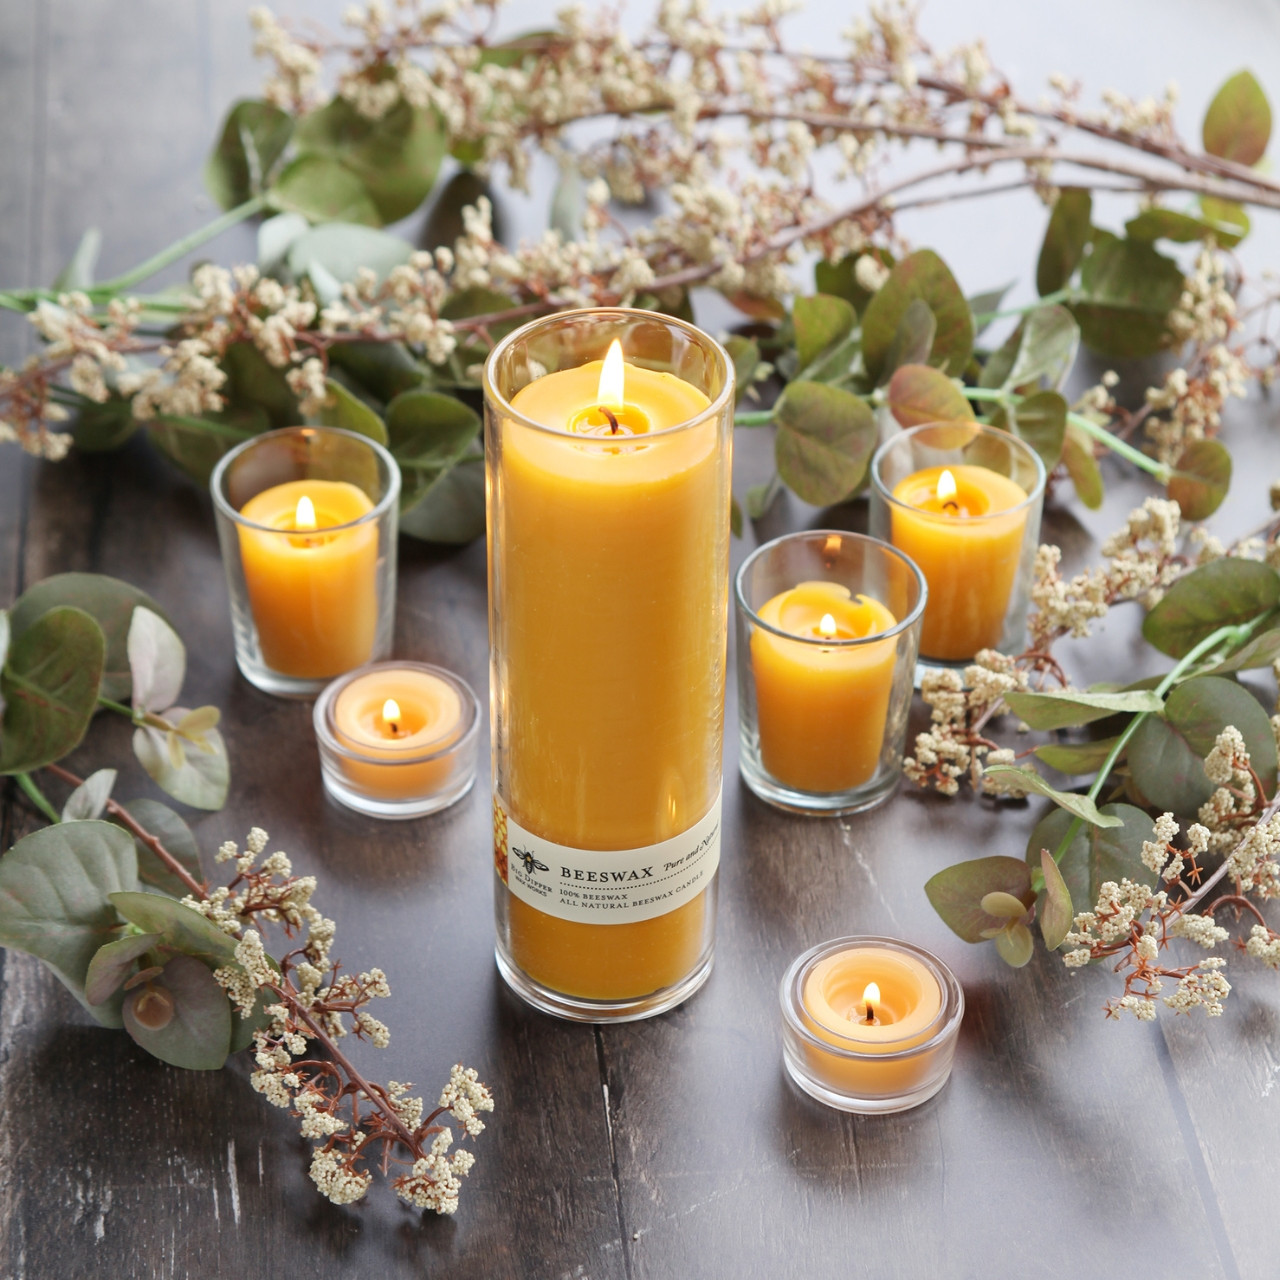 Pure Beeswax Candle - 100% Pure Beeswax